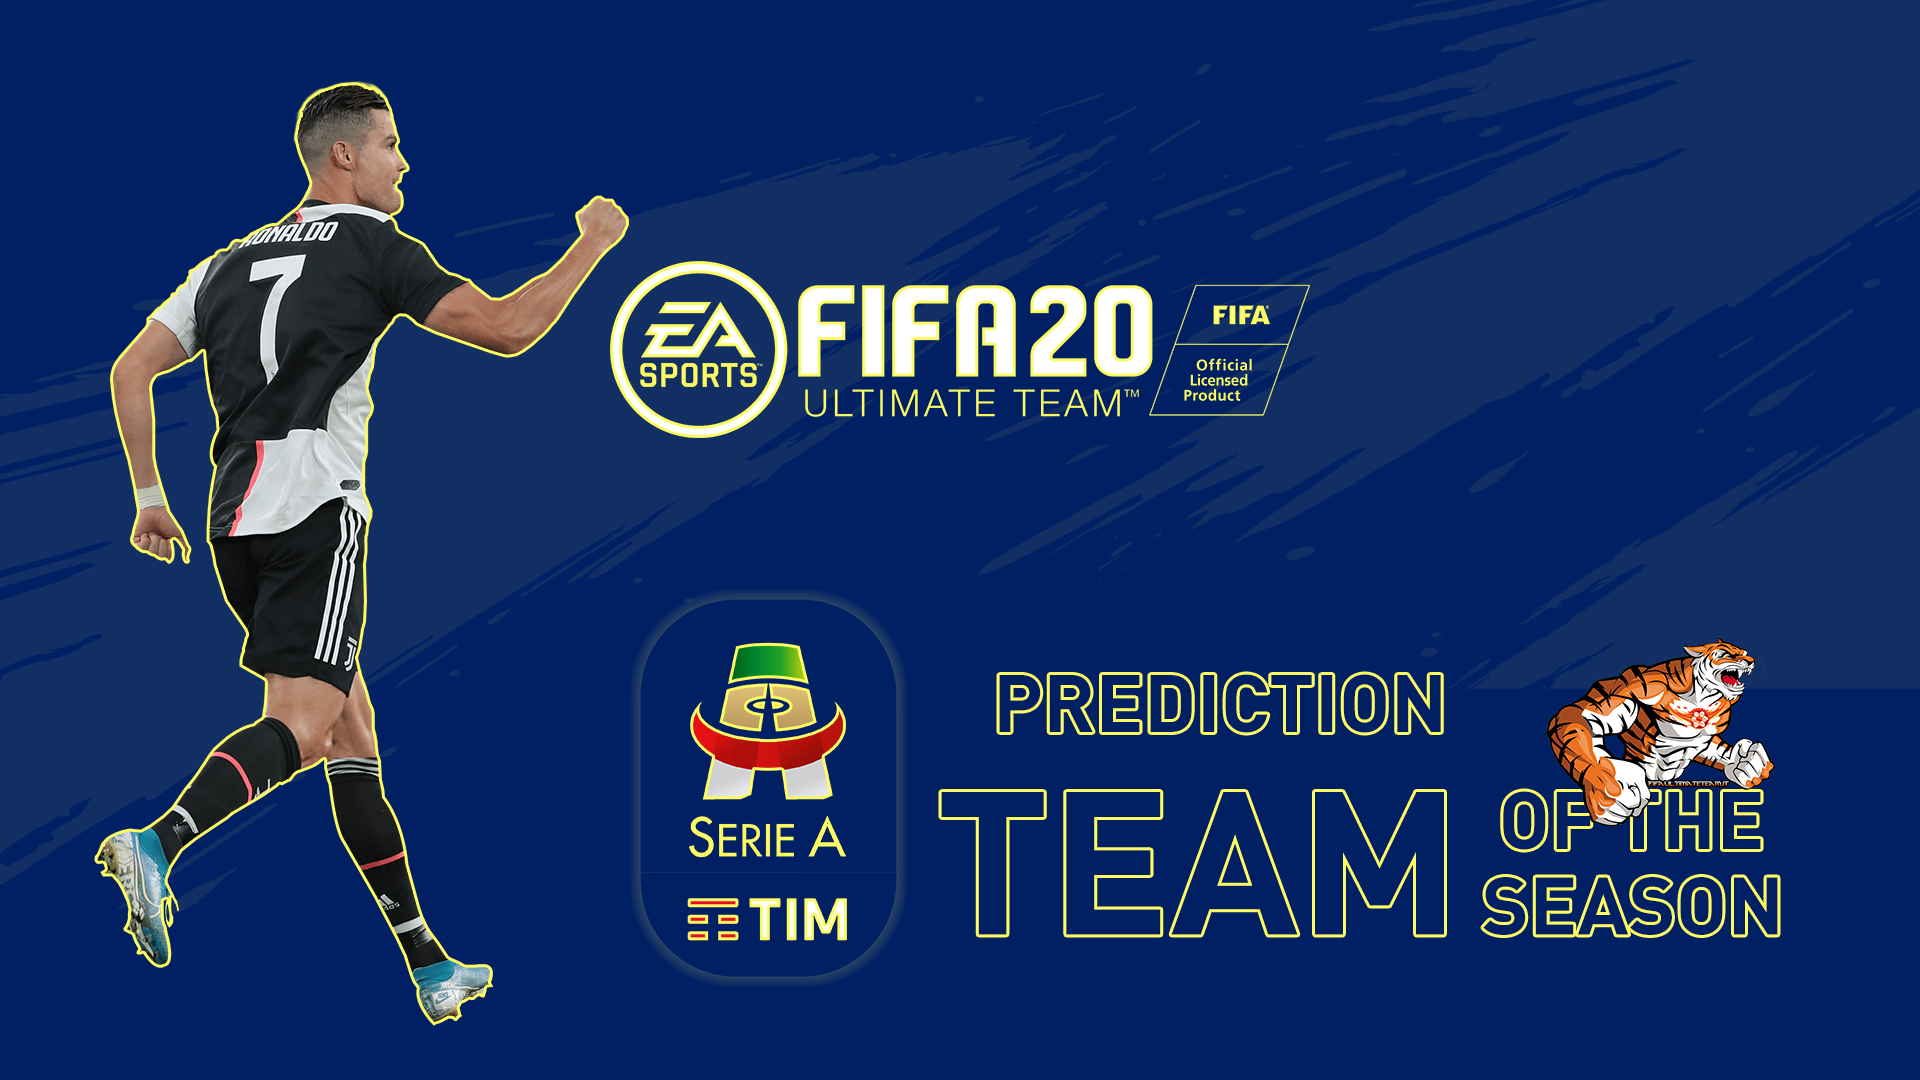 Soaked Medarbejder bit FIFA 20: TOTS Serie A TIM Predictions – Team Of The Season |  FifaUltimateTeam.it - UK